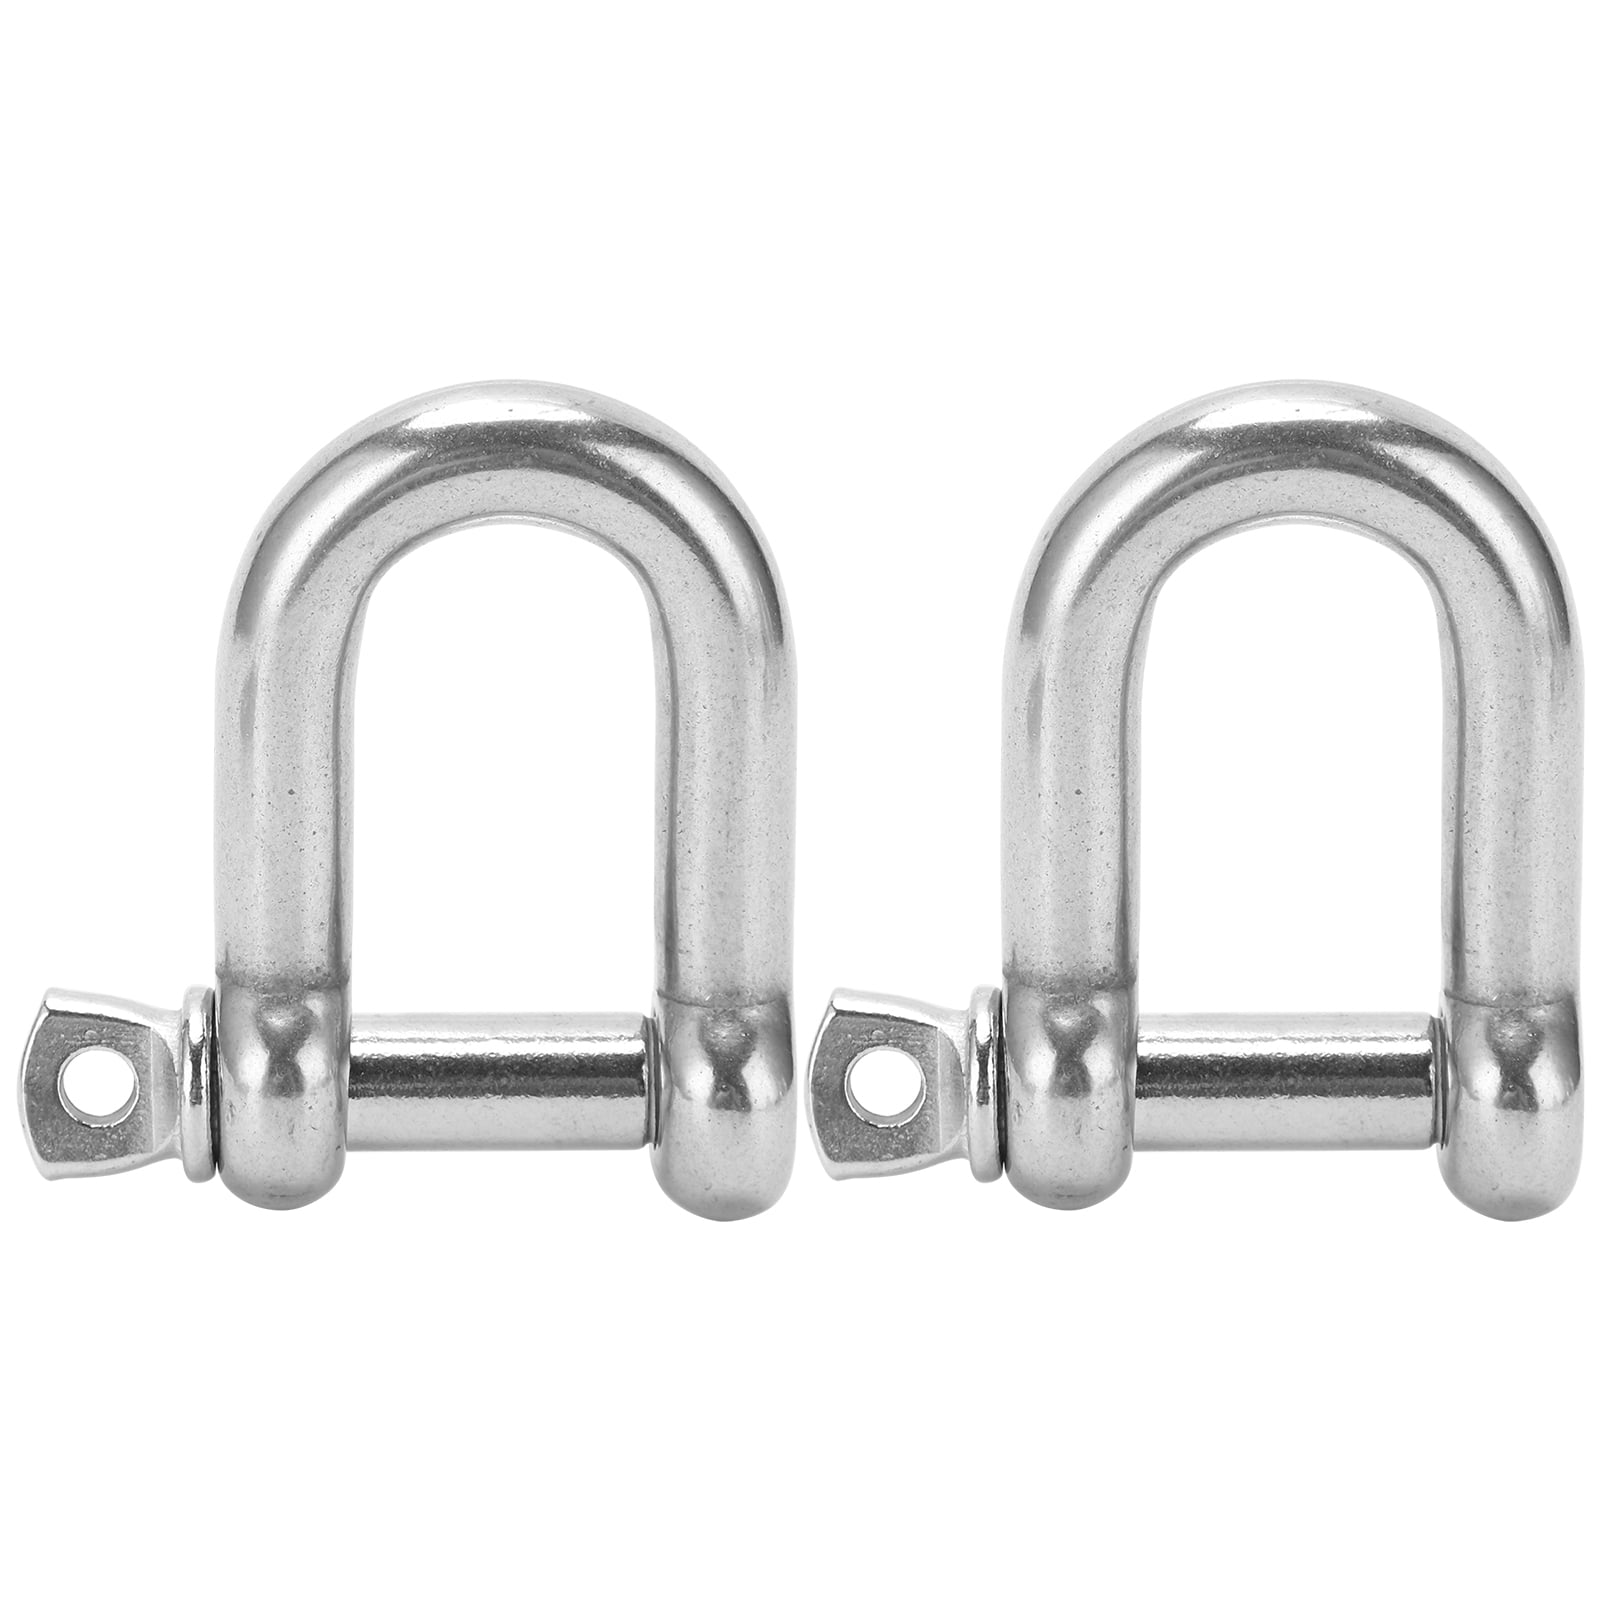 2X D Type Bow Rigging Shackle M6 1/4" 304 Stainless Steel Survival Chain Buckle 